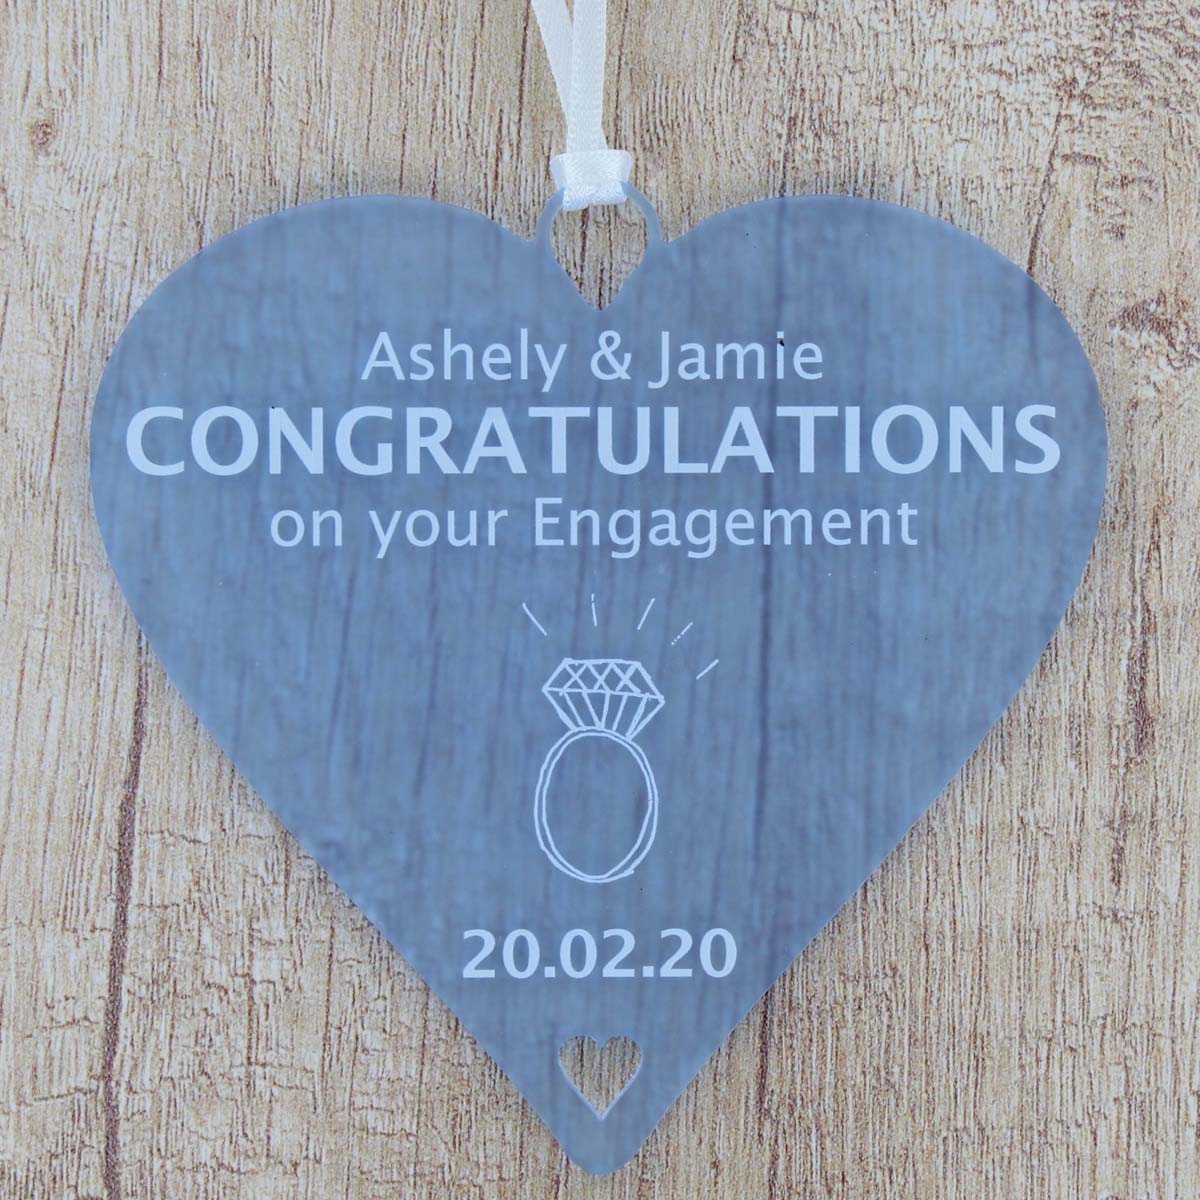 Personalised Engagement Gifts Congratulations on your Engagement Couples Gift - 10cm Heart